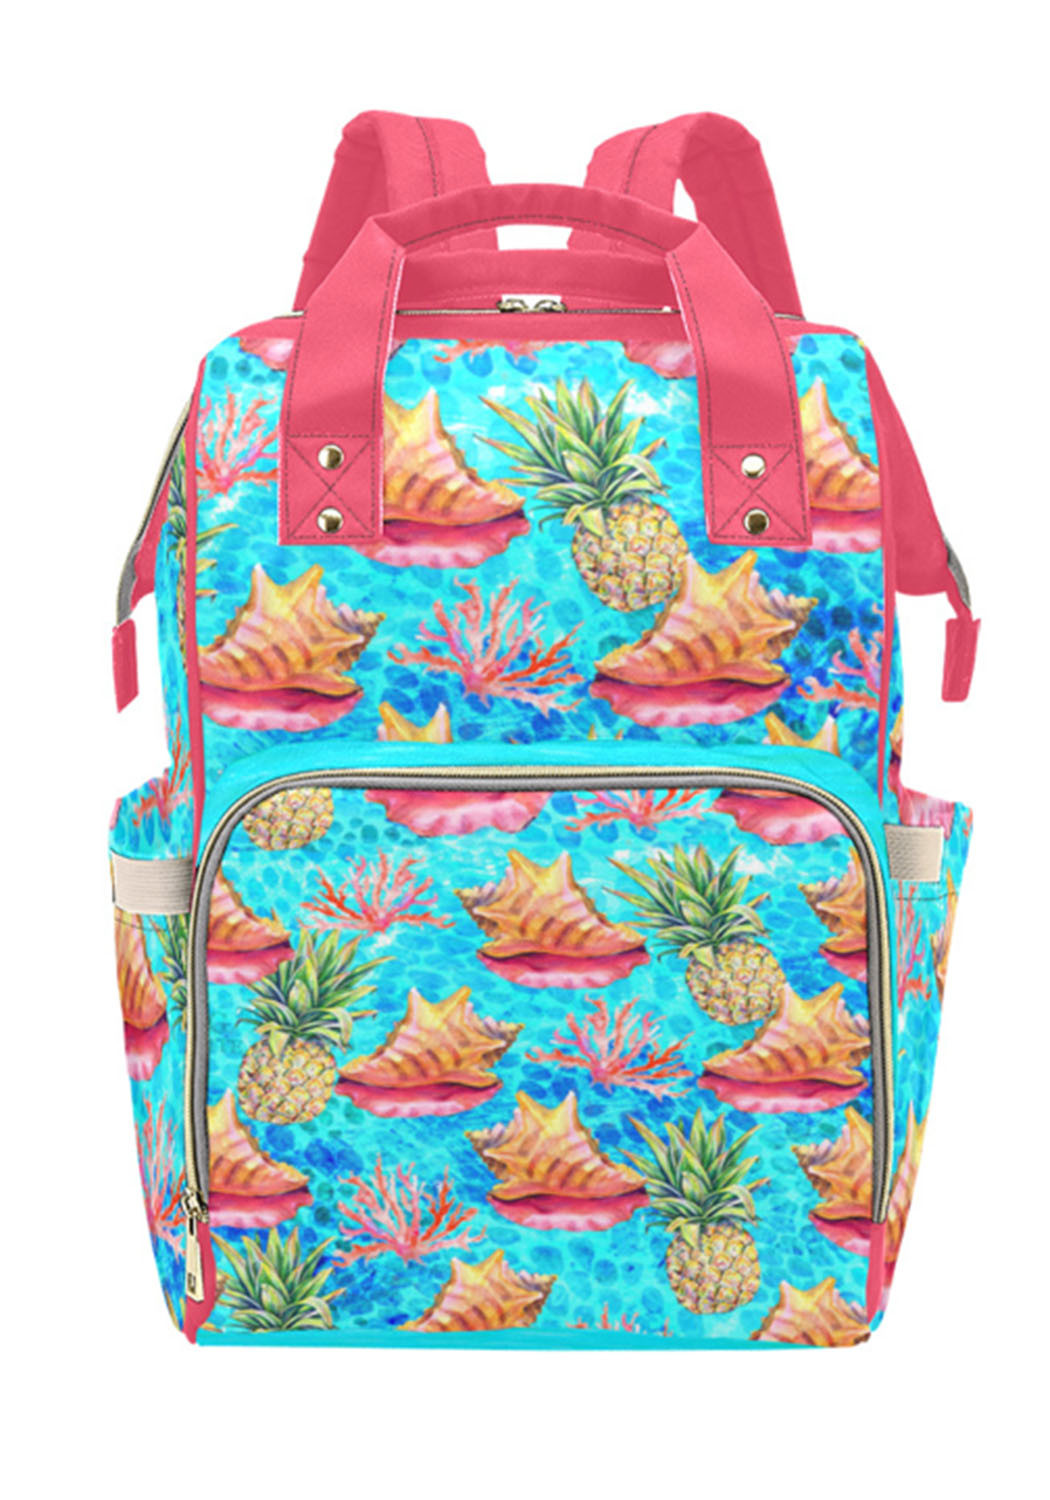 https://cdn10.bigcommerce.com/s-90gulf/products/2657/images/6353/conch_shell_backpack_sporty_girl_apparel___54641.1678991837.2280.2280.jpg?c=2